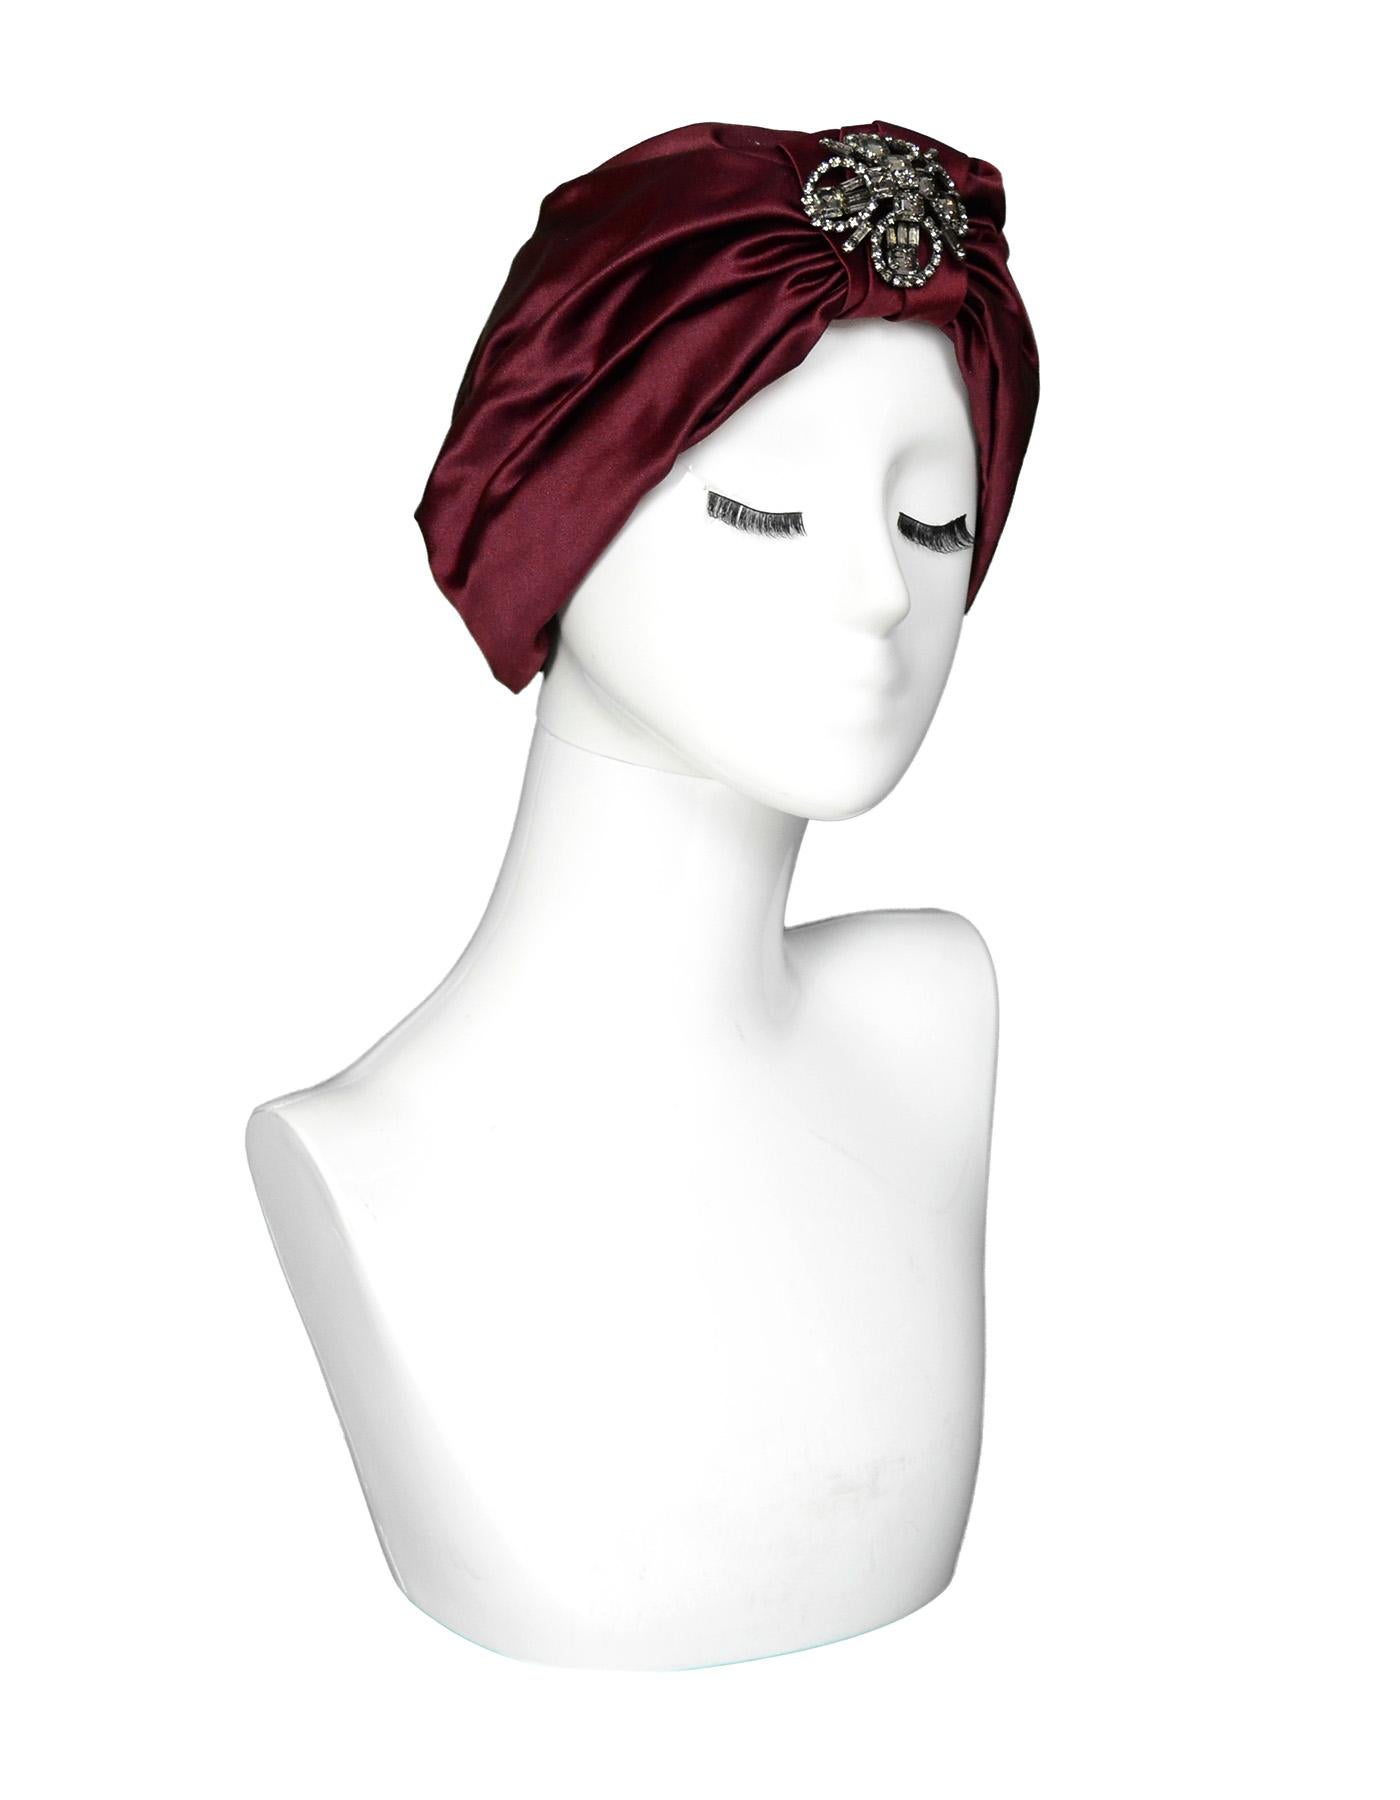 Jennifer Behr Burgundy Sateen/Crystal Sophia Turban Hat

Color: Burgundy
Materials: Sateen (no composition tag)
Retail Price: $698 + tax
Overall Condition: Excellent pre-owned condition with the exception of some marks on the inside from